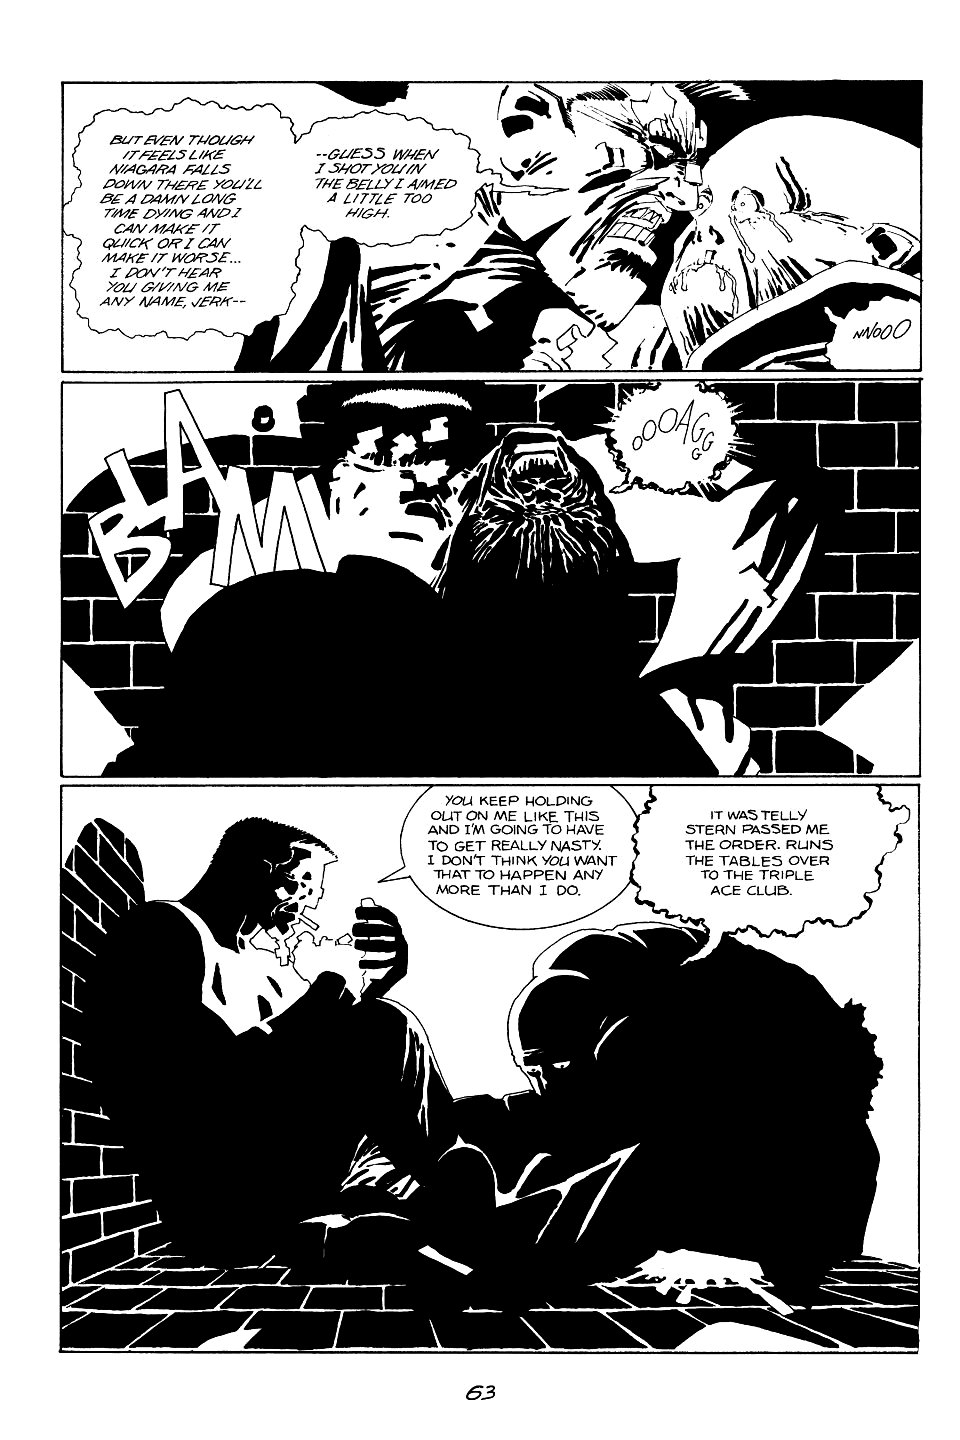 page 63 of sin city 1 the hard goodbye